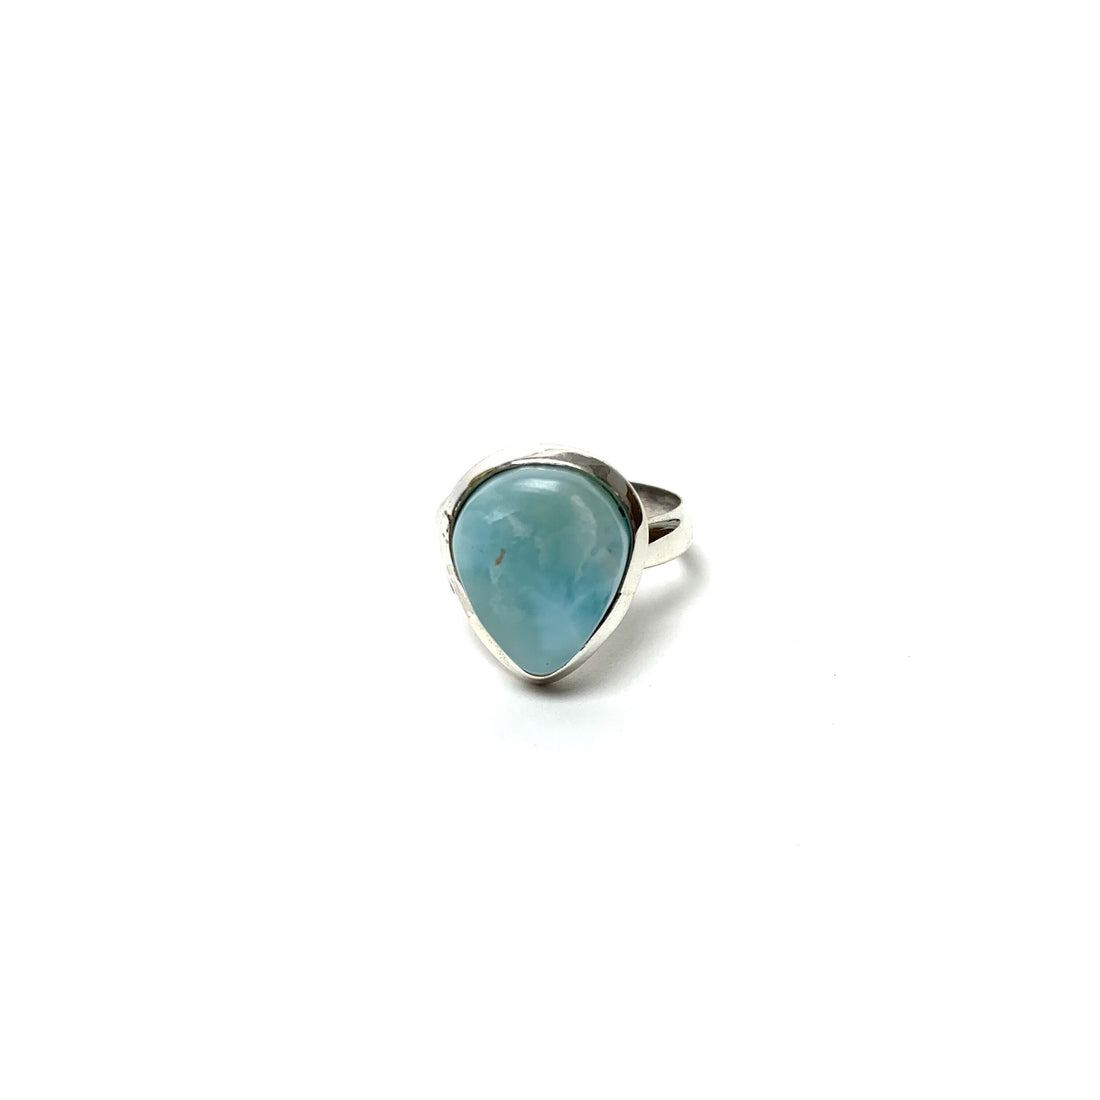 Larimar Silver Ring Rings Crystals K. $60.00 Size 6.5 